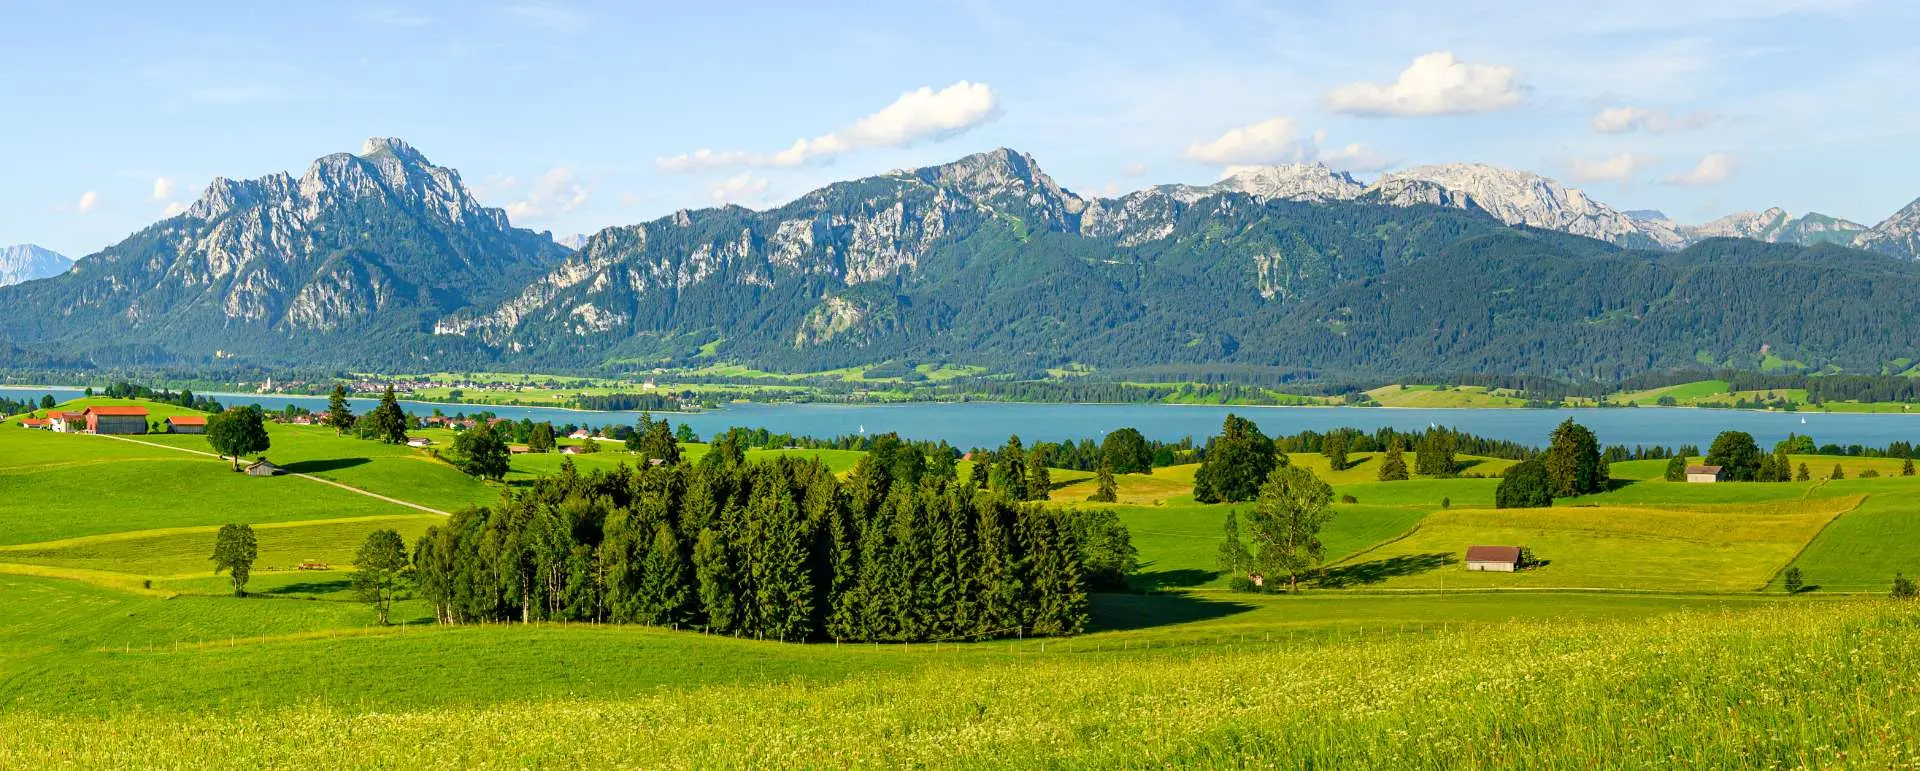 Allgäu - the destination for group hotel for nature lovers